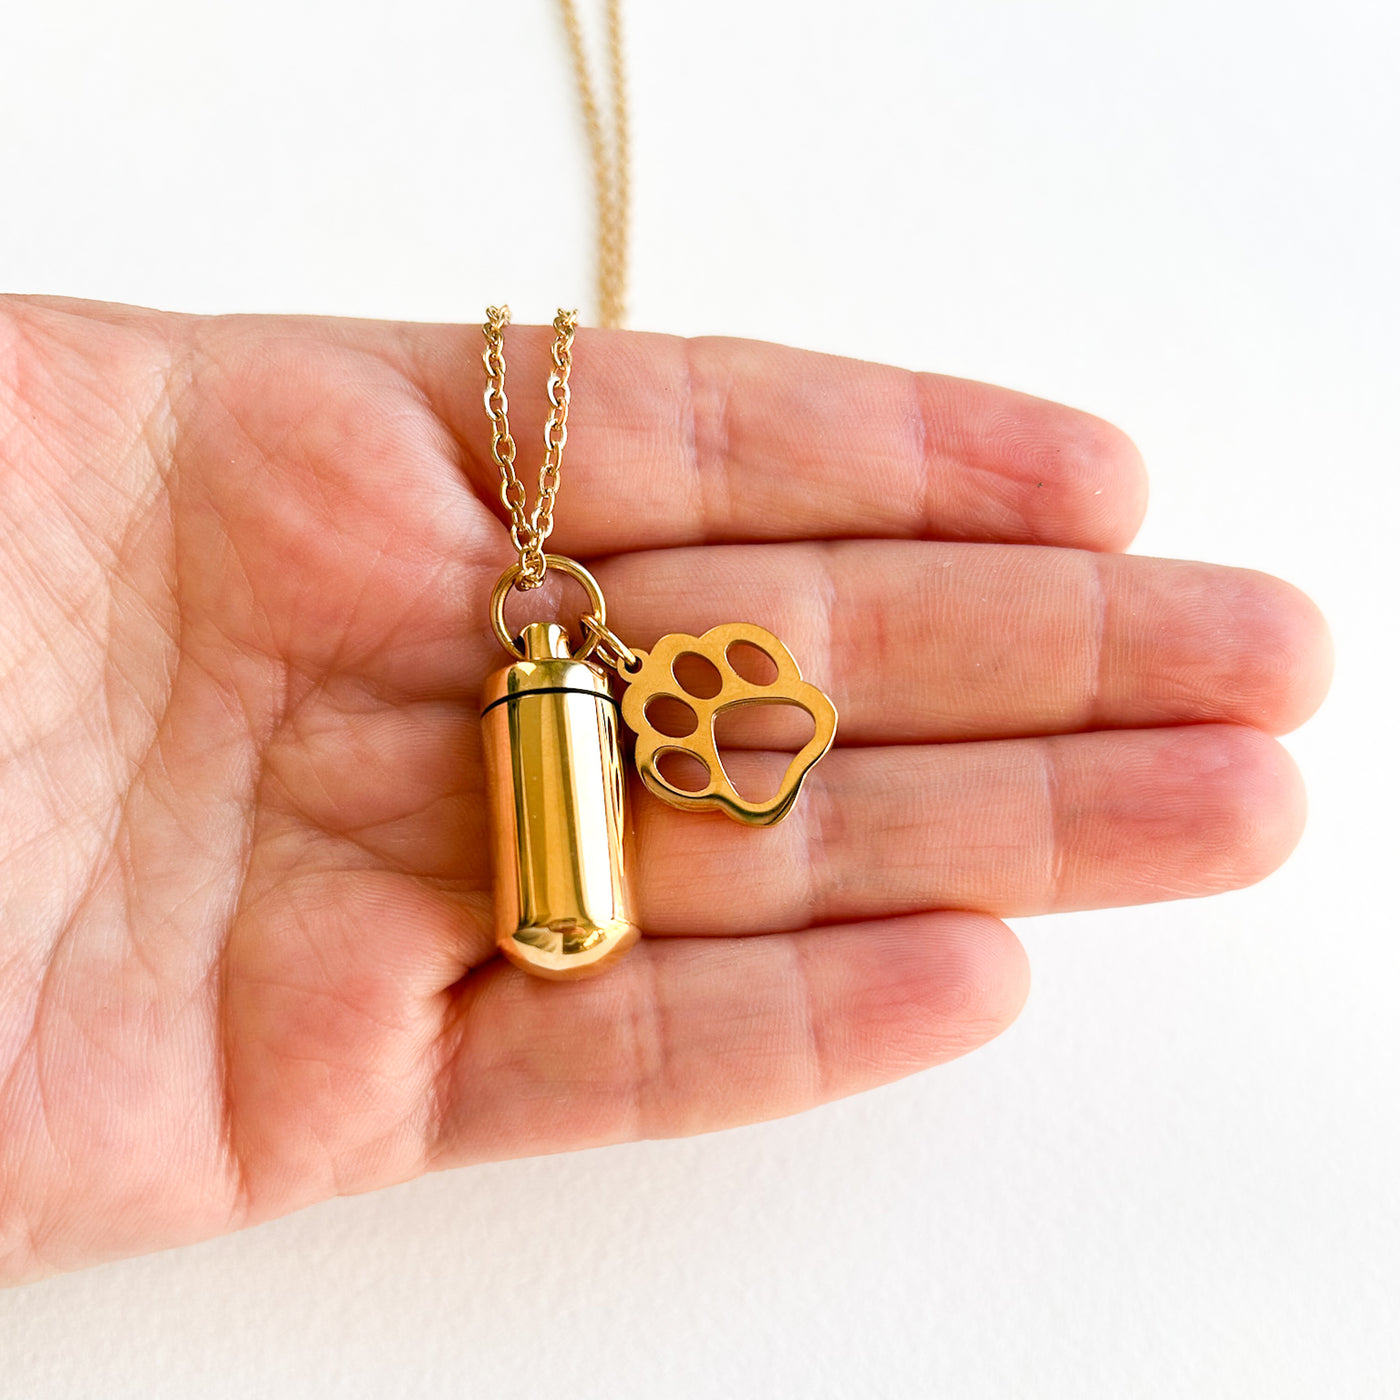 Cremation Jewelry -Cylinder Memorial Urn Necklace - Pet loss Capsule